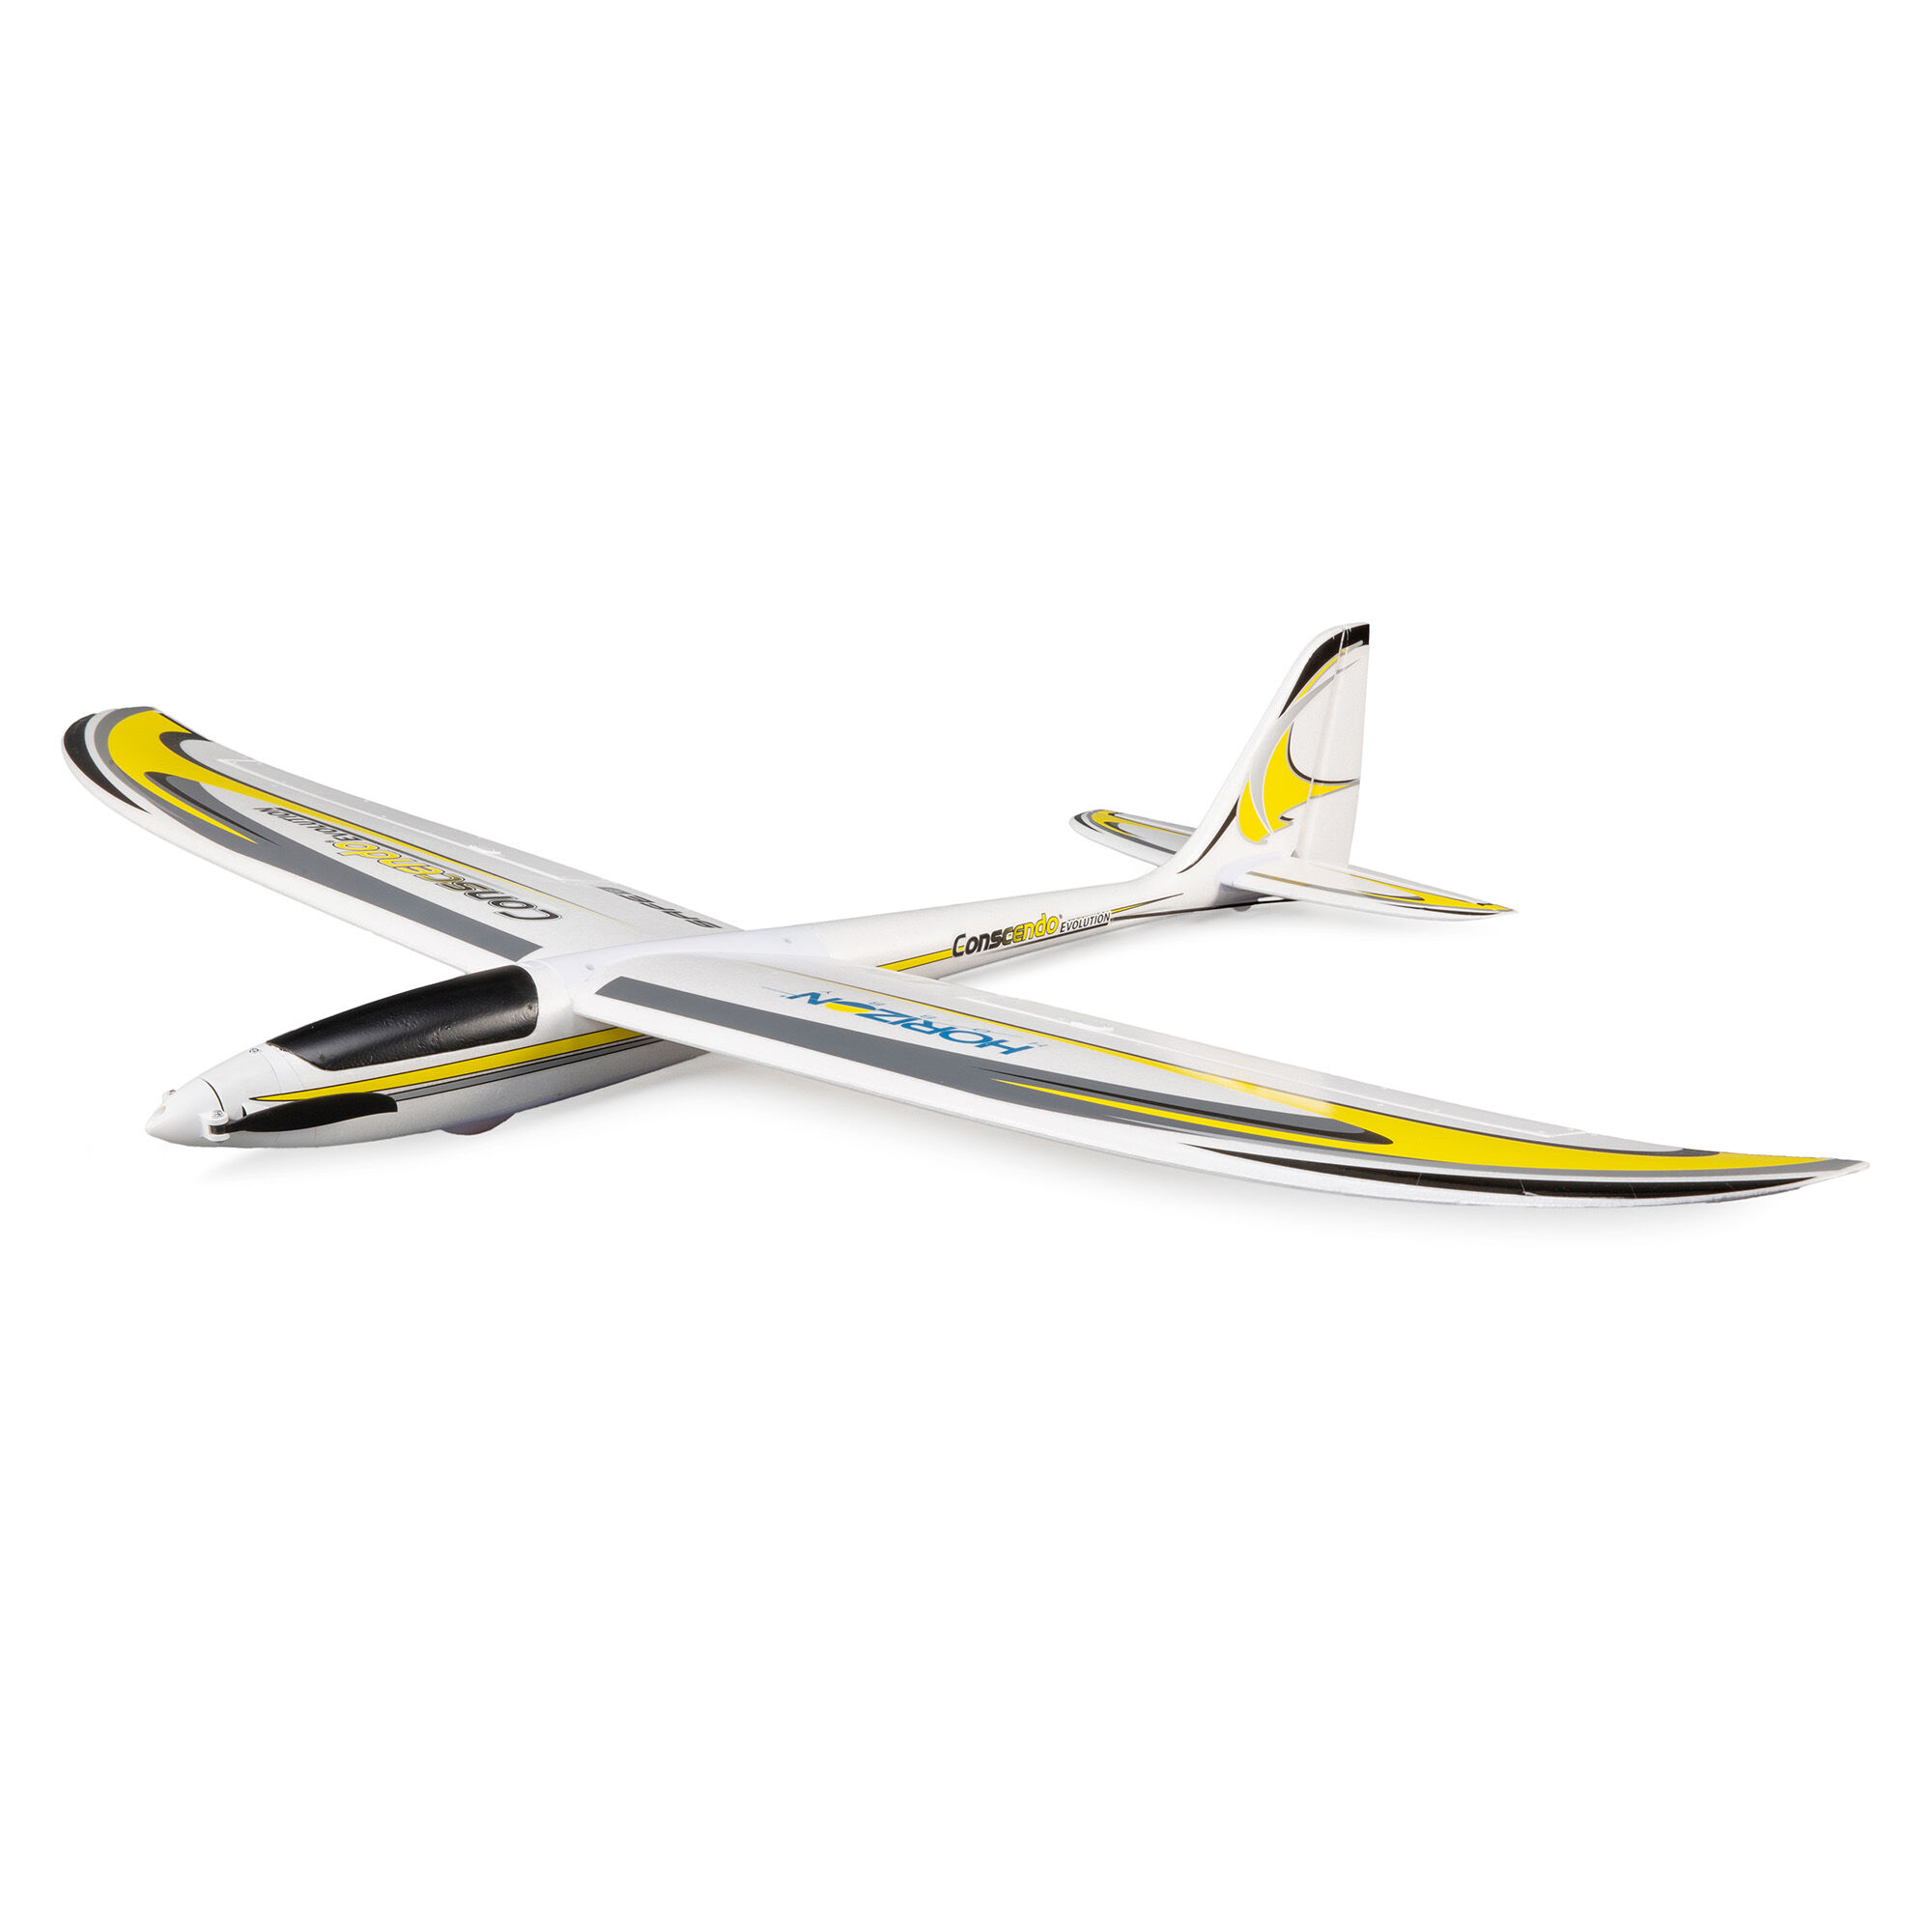 rc gliders and sailplanes